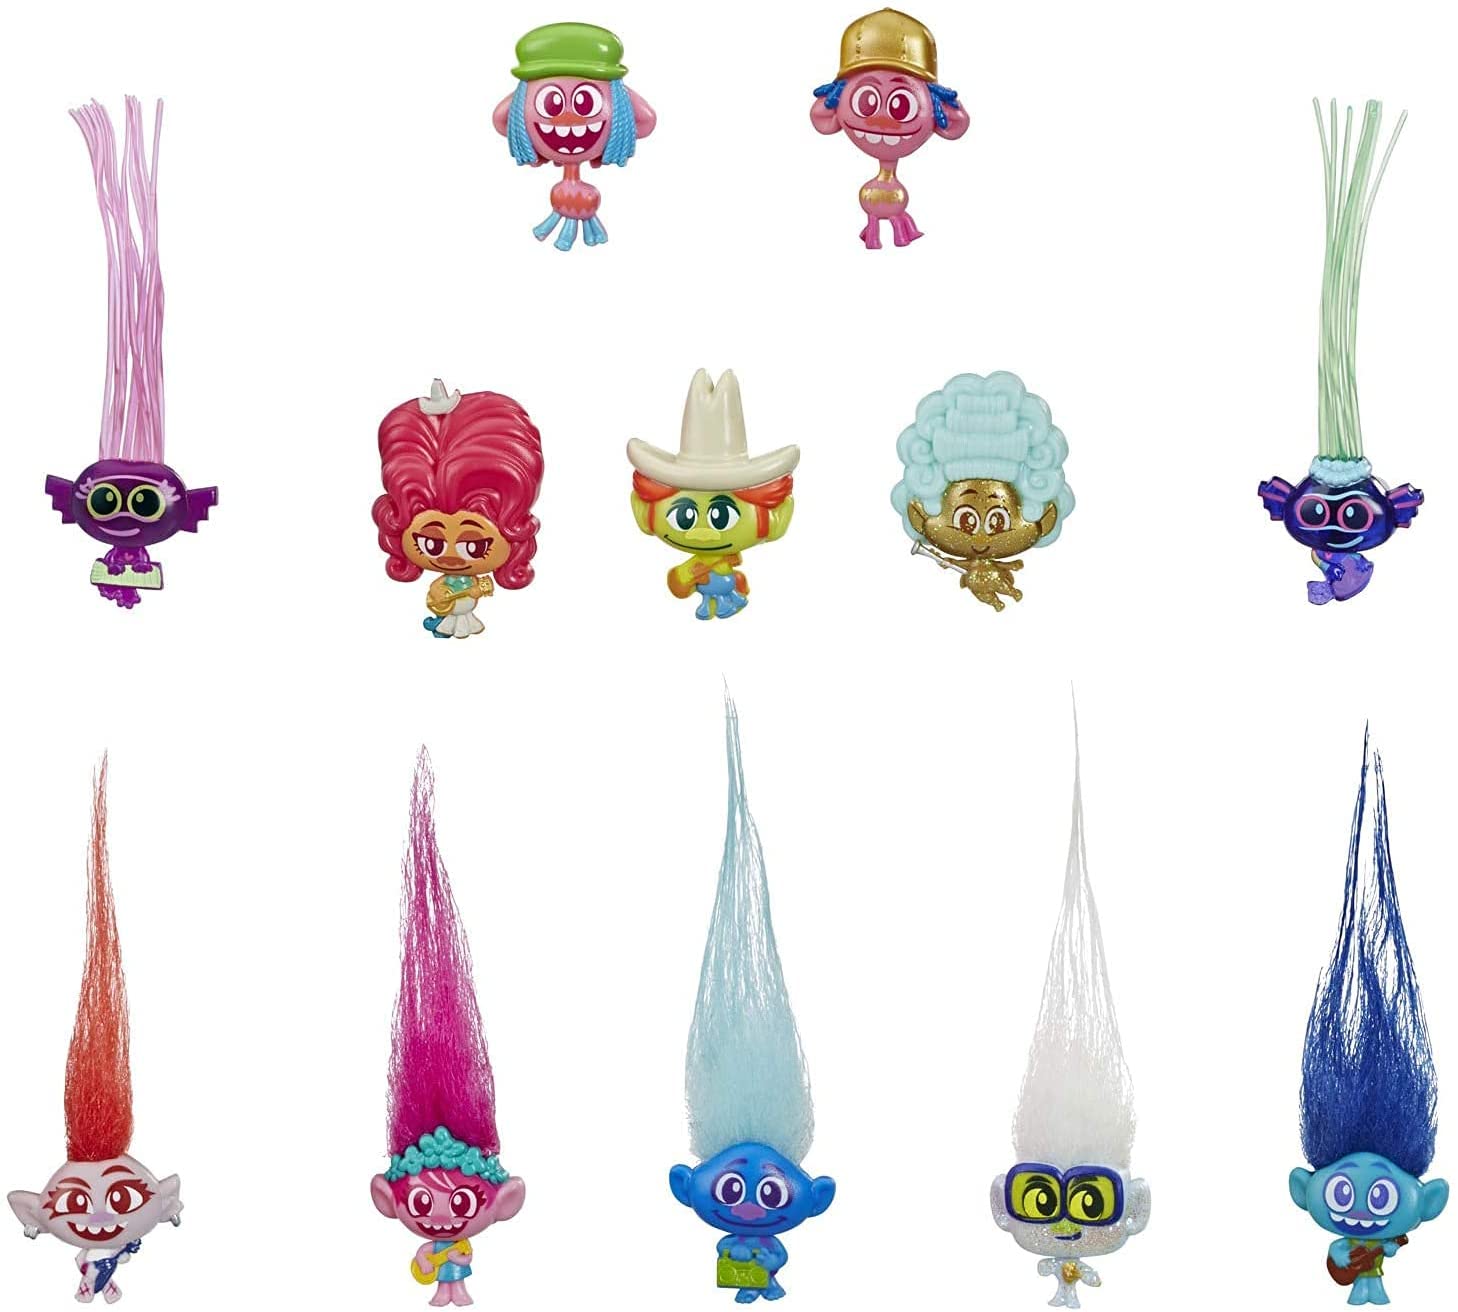 Dreamworks Trolls World Tour Tiny Dancers Blind Pack Each With Figure & Accessory - Pack of 6 - Toptoys2u